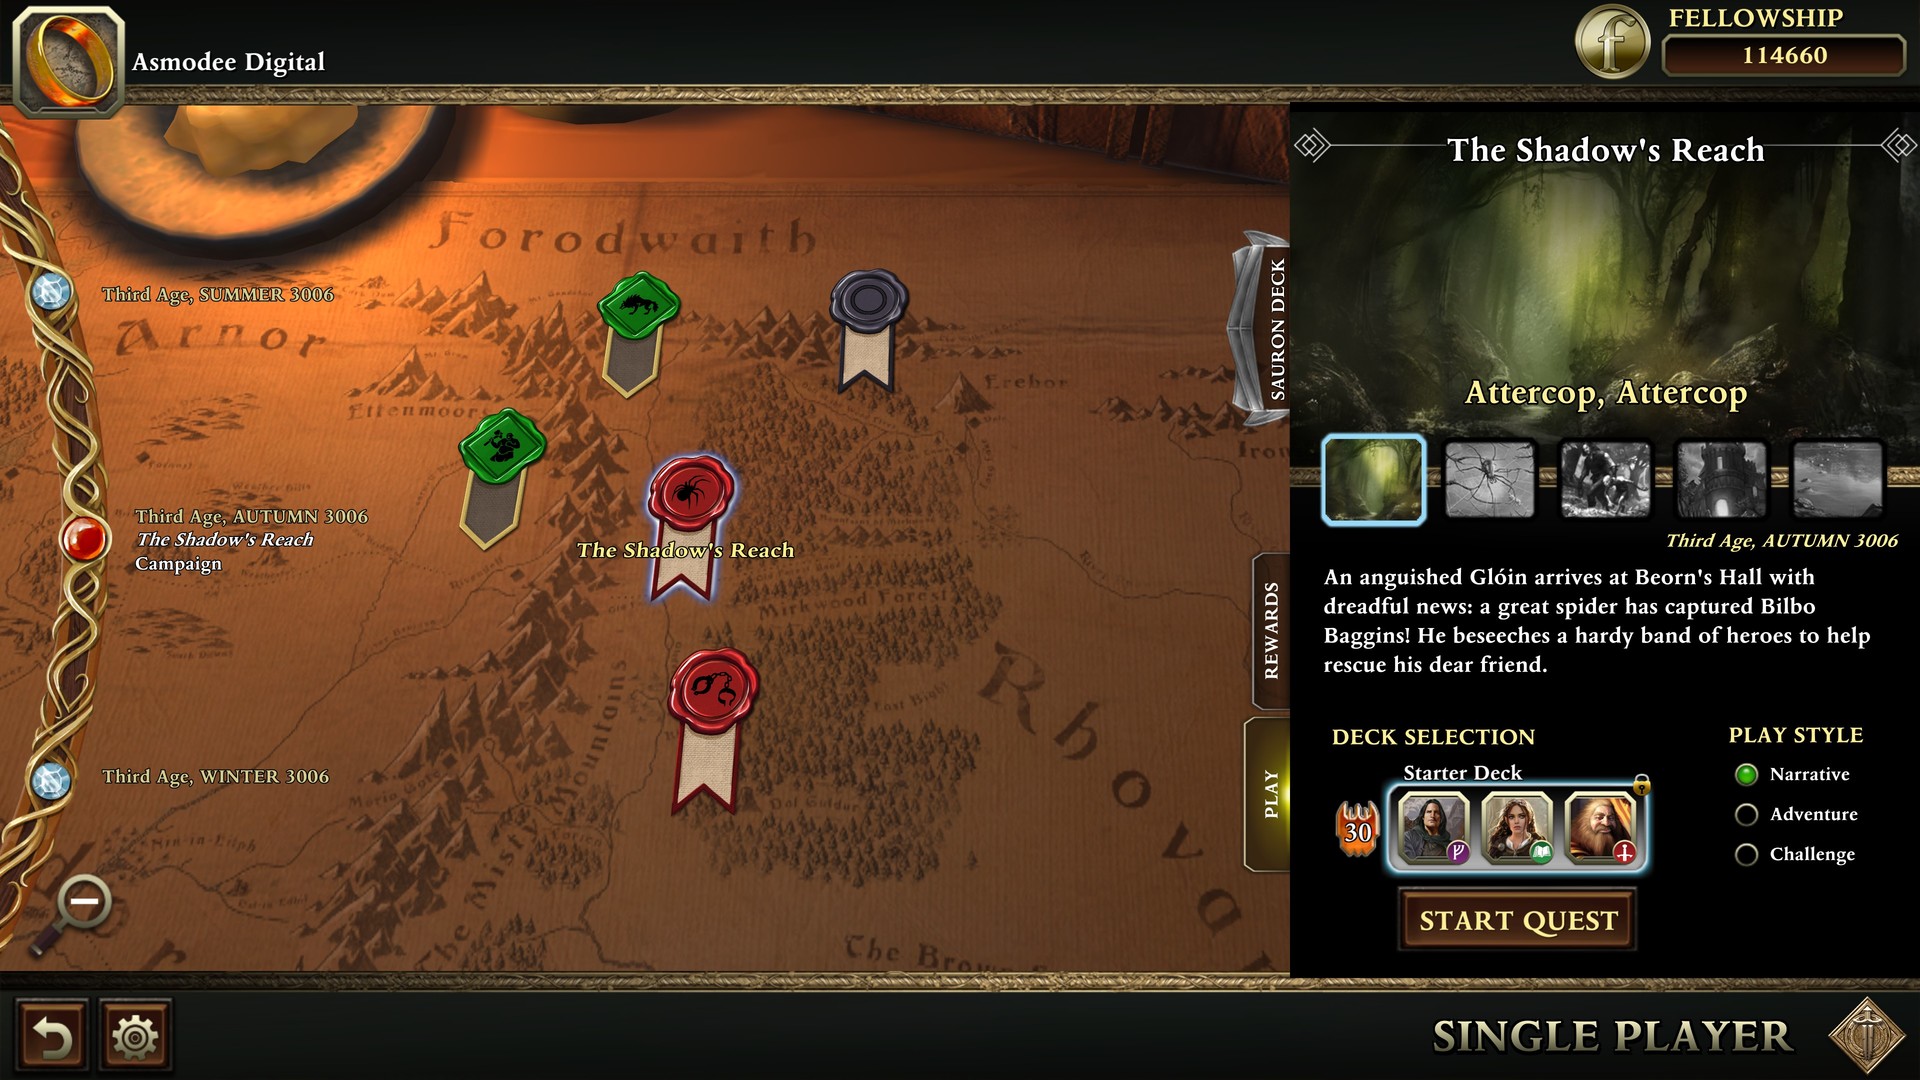 Raap privaat Ideaal The Lord of the Rings: Adventure Card Game - Definitive Edition on Steam